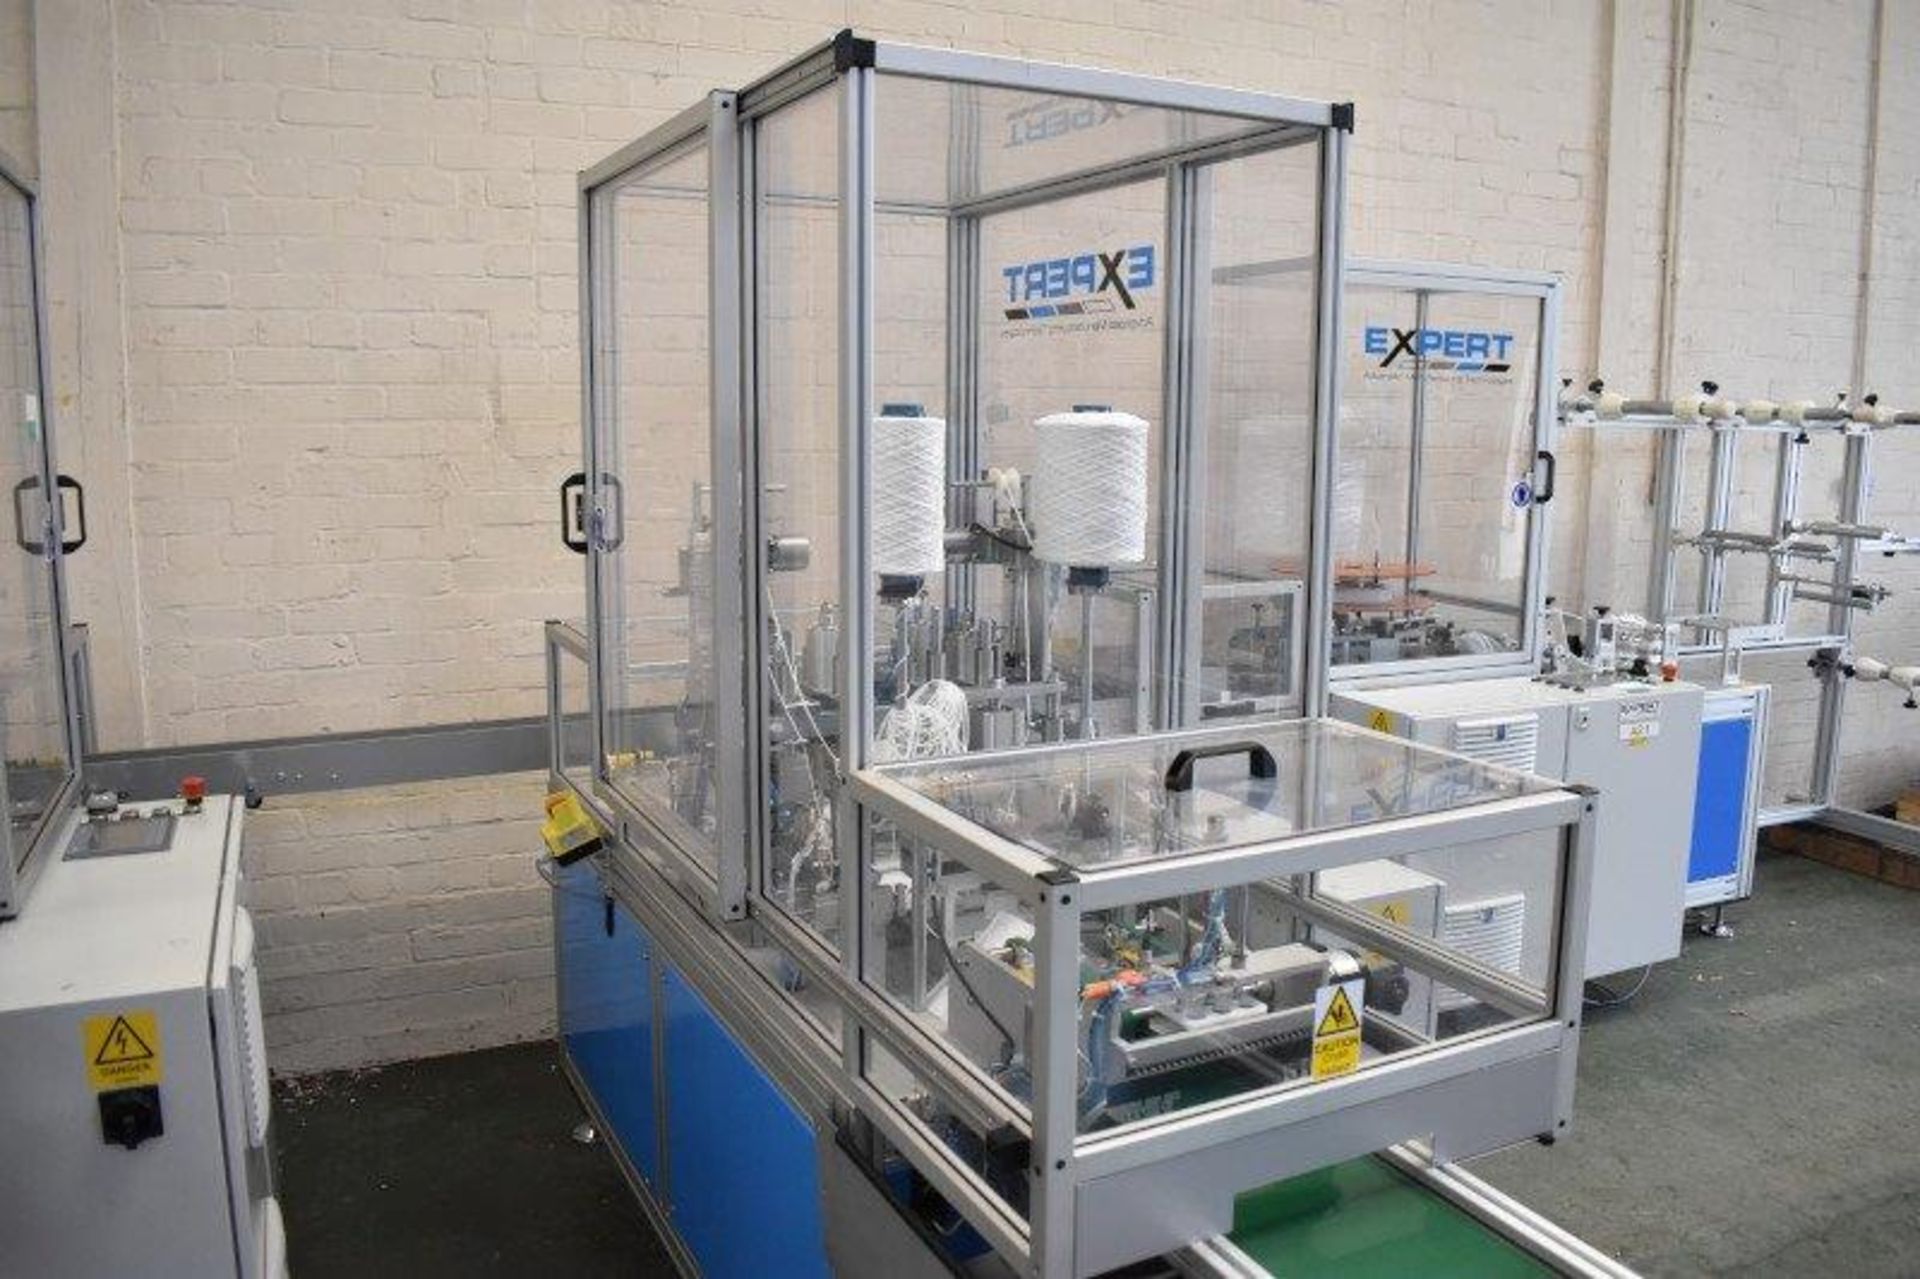 Expert fully automated Mask Making Machine - manufactured in 2020 - Image 10 of 21